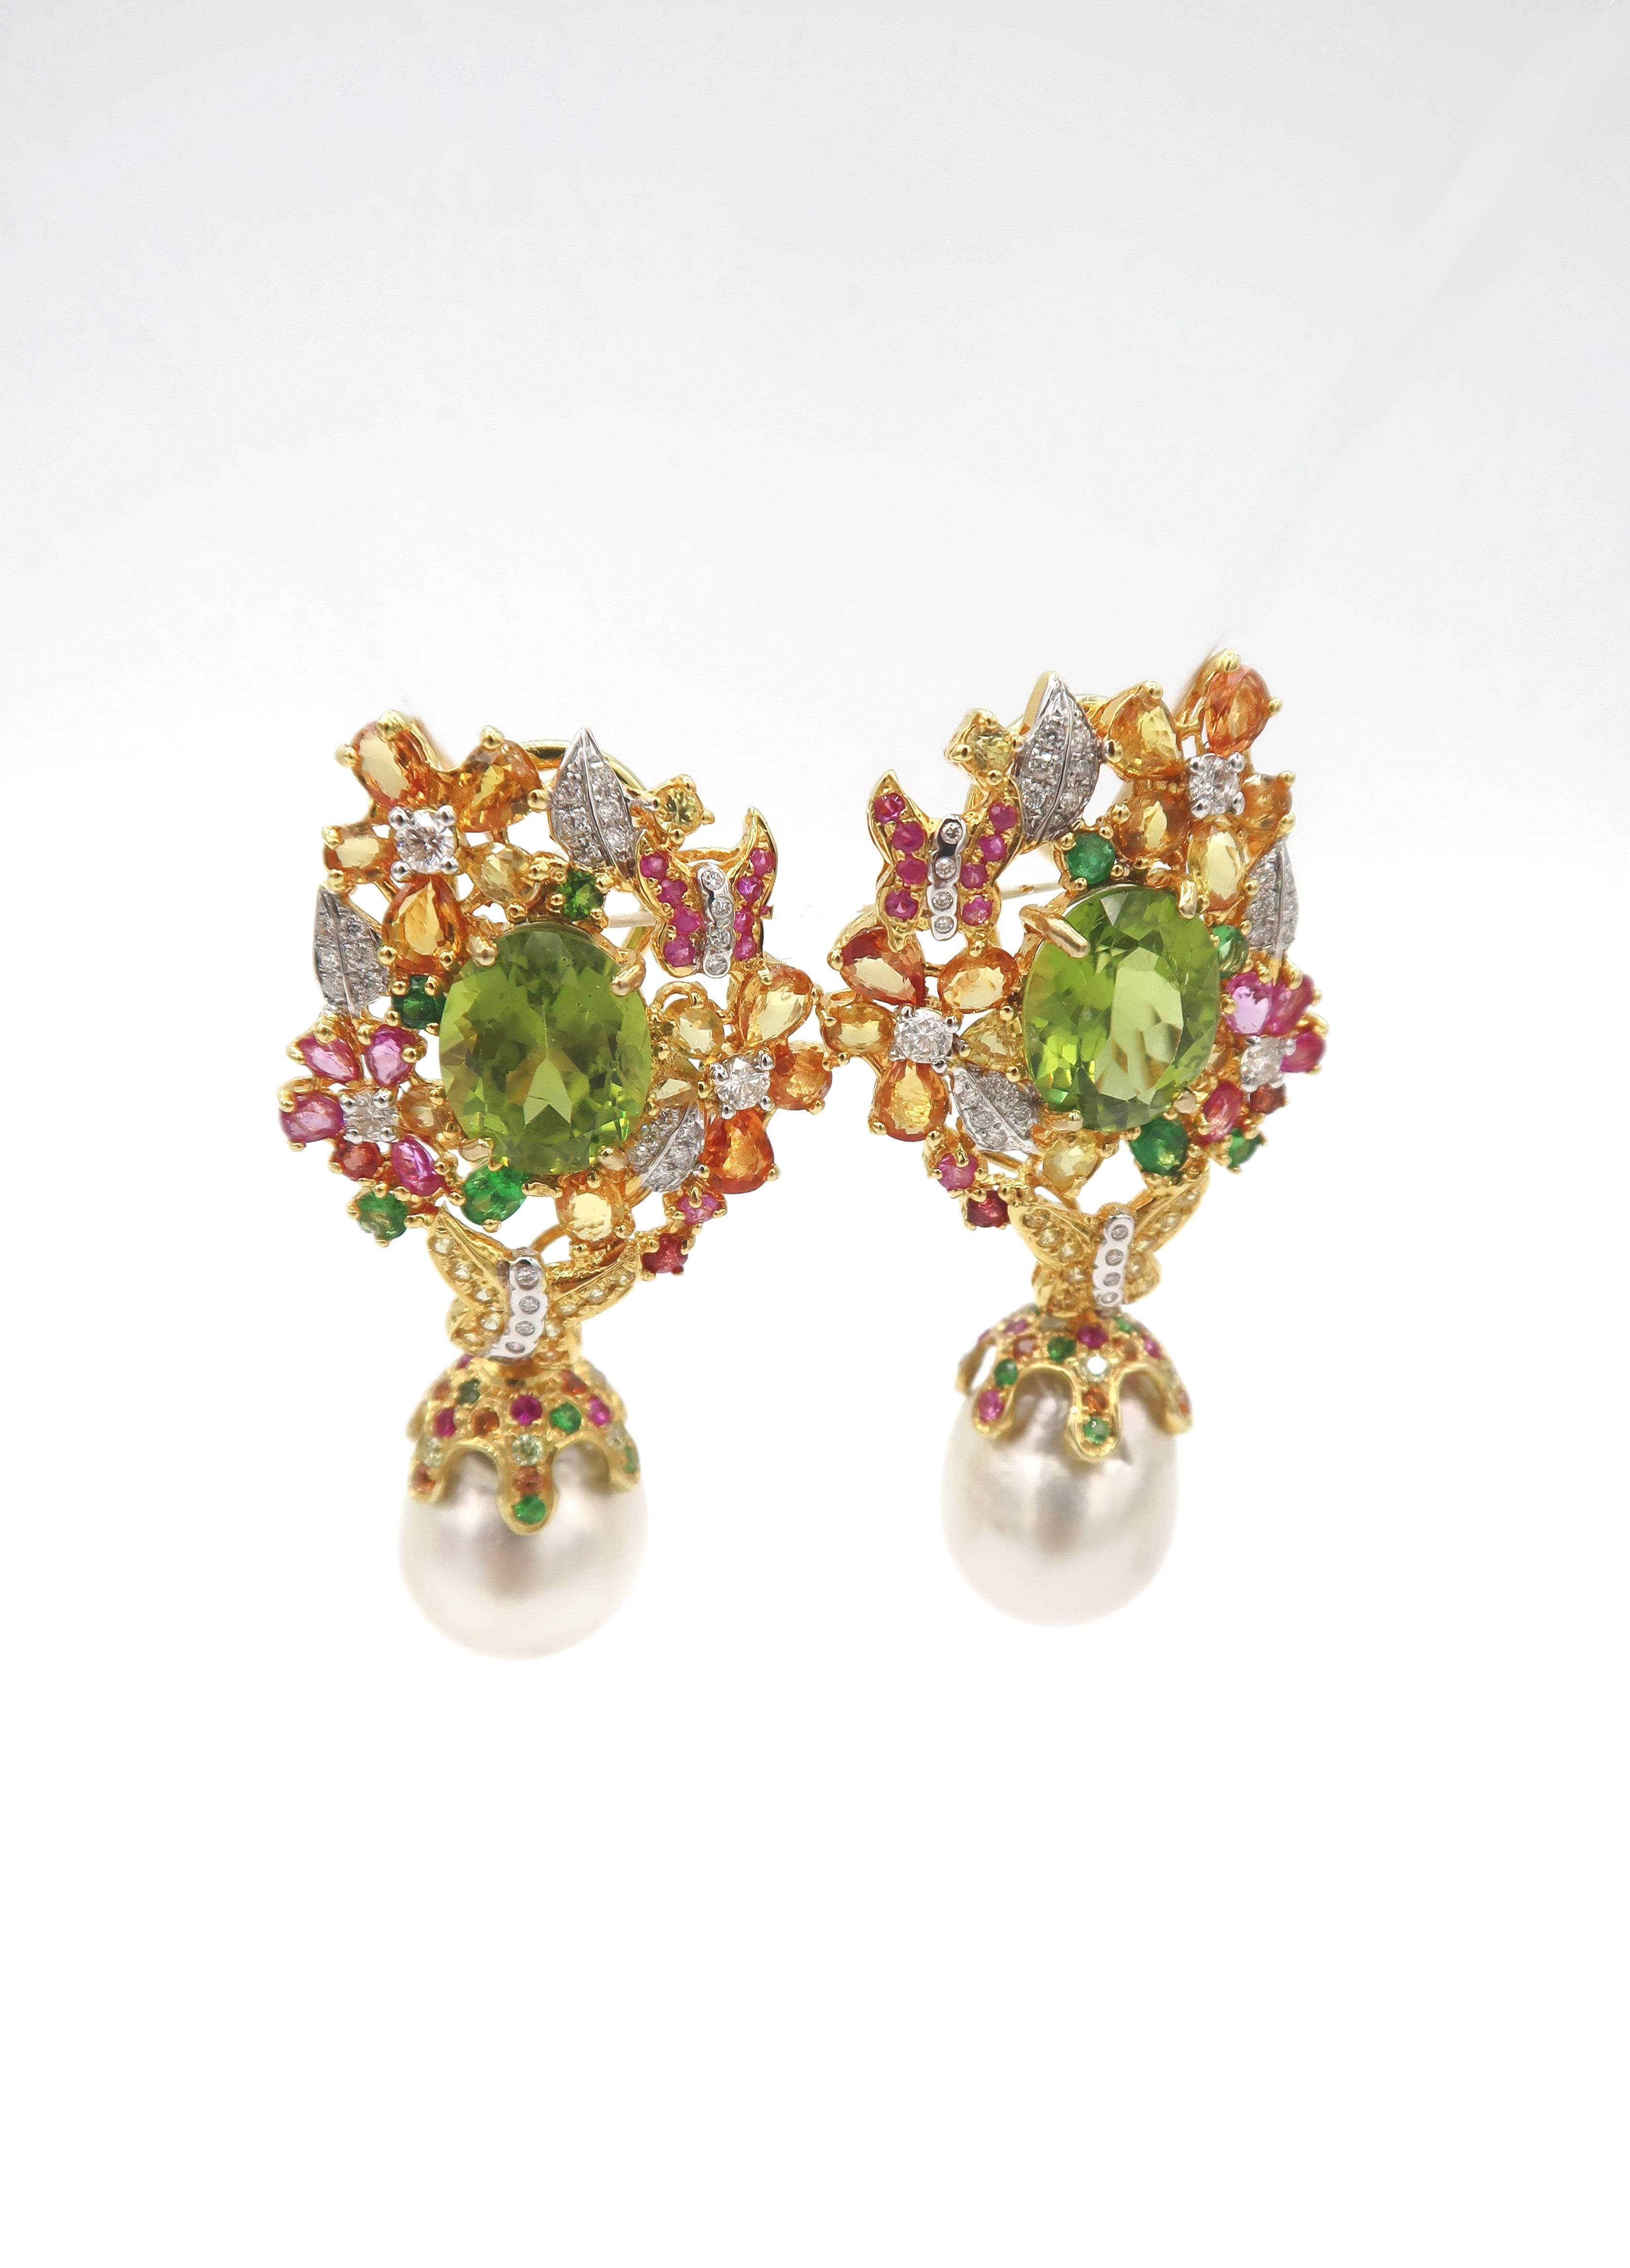 Baroque White South Sea Pearl Drop Earrings in 18K Yellow Gold adorned with Peridot, Tsavorite, Yellow Sapphire, Pink Sapphire, Orange Sapphire and Diamond

Peridot : 8.92cts.
Diamond : 1.01ct.
Other Gems : Tsavorite/ Yellow Sapphire/ Orange